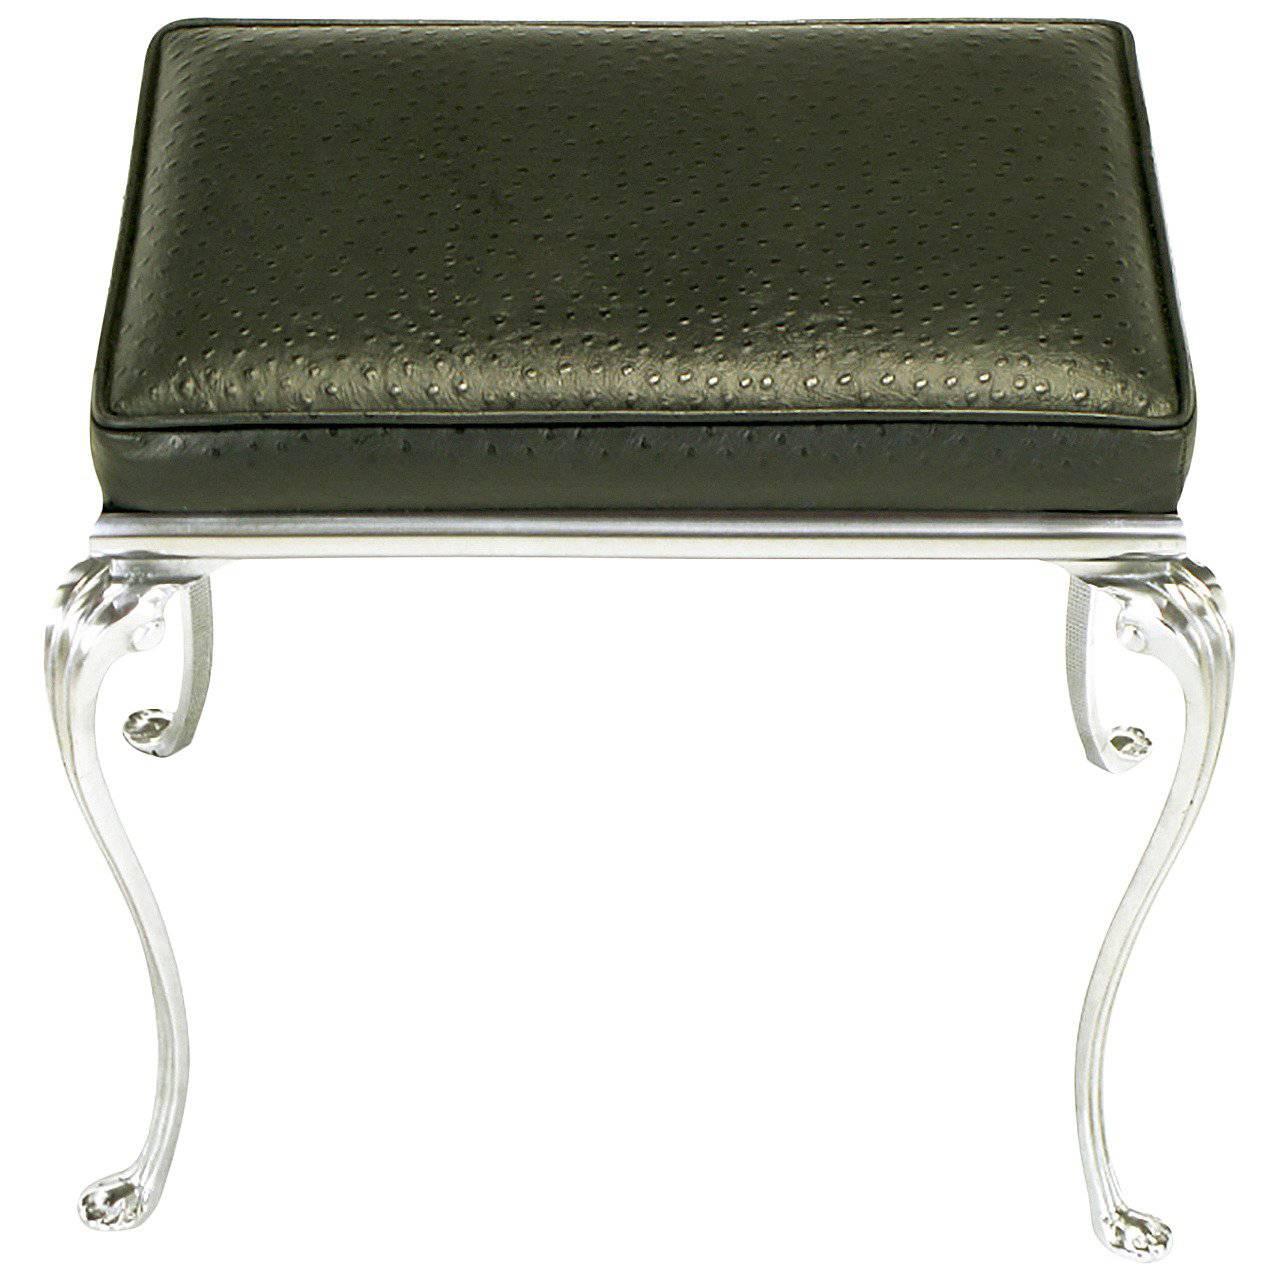 Polished Aluminum Cabriole Leg Bench with Ostrich Embossed Leather